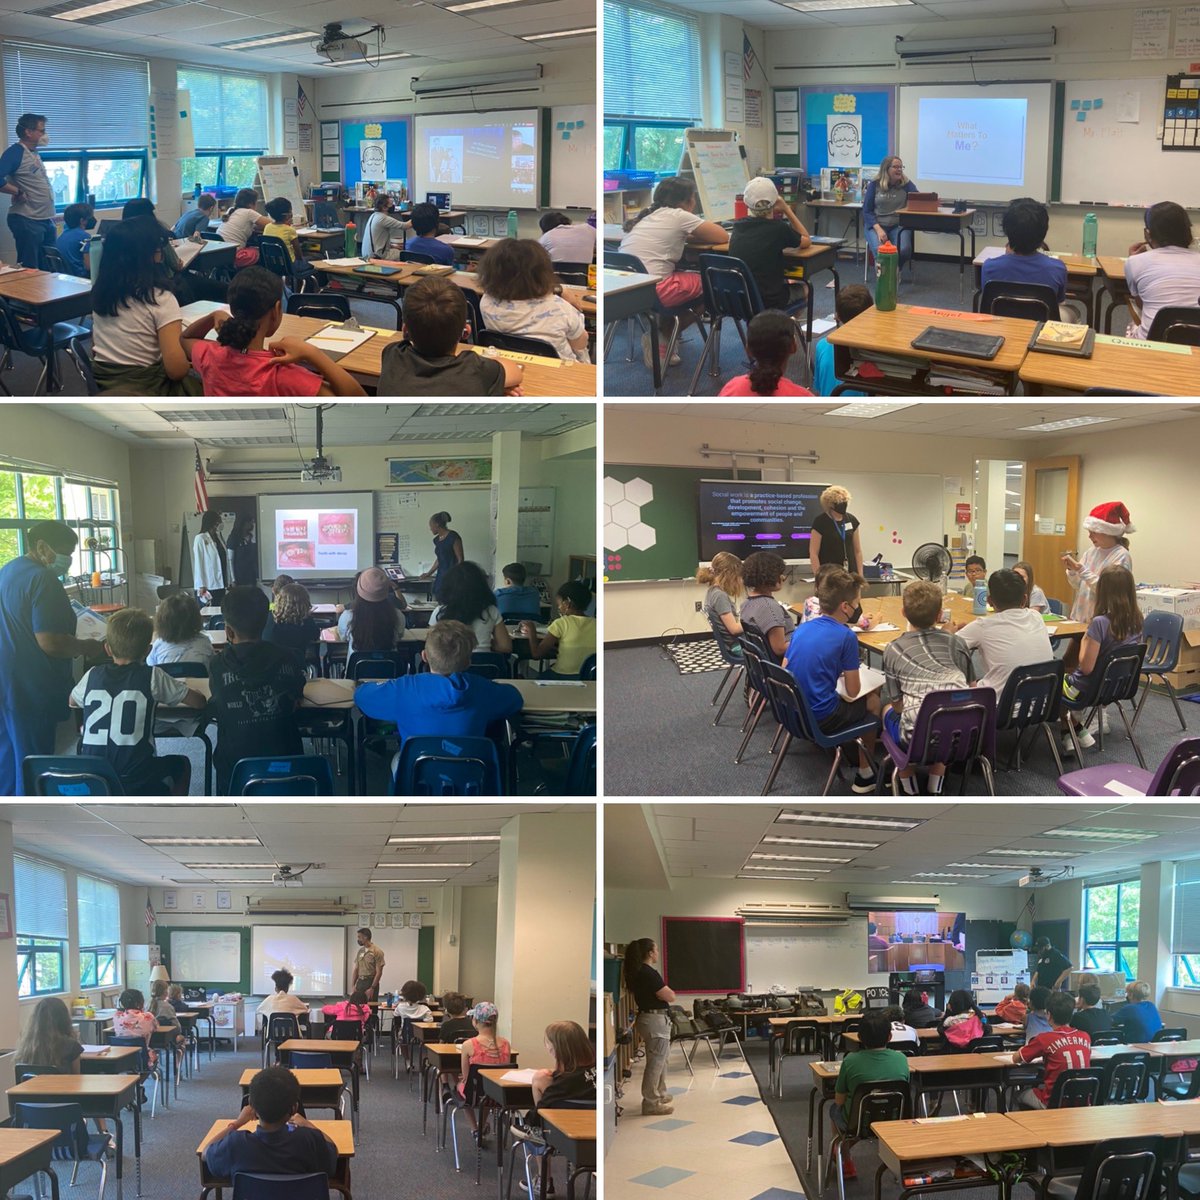 One of my favorite events I get to run is finally here…5th GRADE CAREER DAY! Our <a target='_blank' href='http://twitter.com/LB_5thGrade'>@LB_5thGrade</a> students are hearing presentations from a law firm recruiter, dentist, social worker, deputy US Marshall, marine pilot, & SVP from Disney Theatrical group. <a target='_blank' href='http://twitter.com/longbranch_es'>@longbranch_es</a> <a target='_blank' href='https://t.co/zHhdvPLwu7'>https://t.co/zHhdvPLwu7</a>